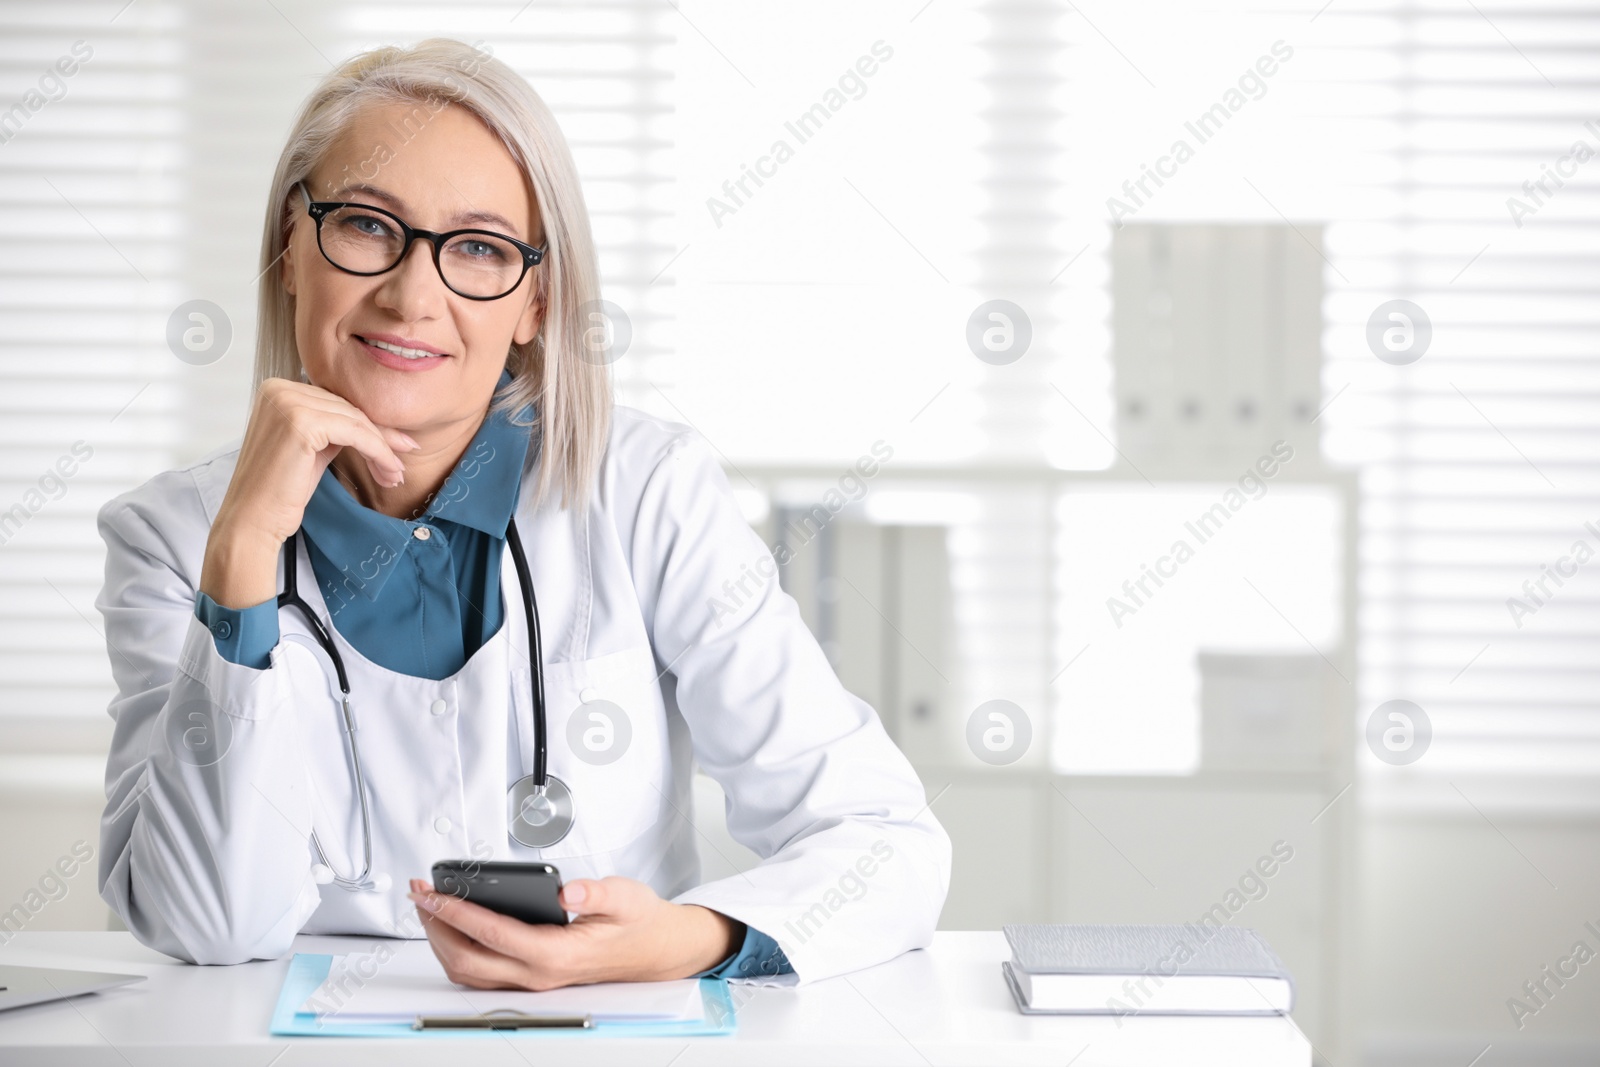 Photo of Mature female doctor with smartphone at table in office